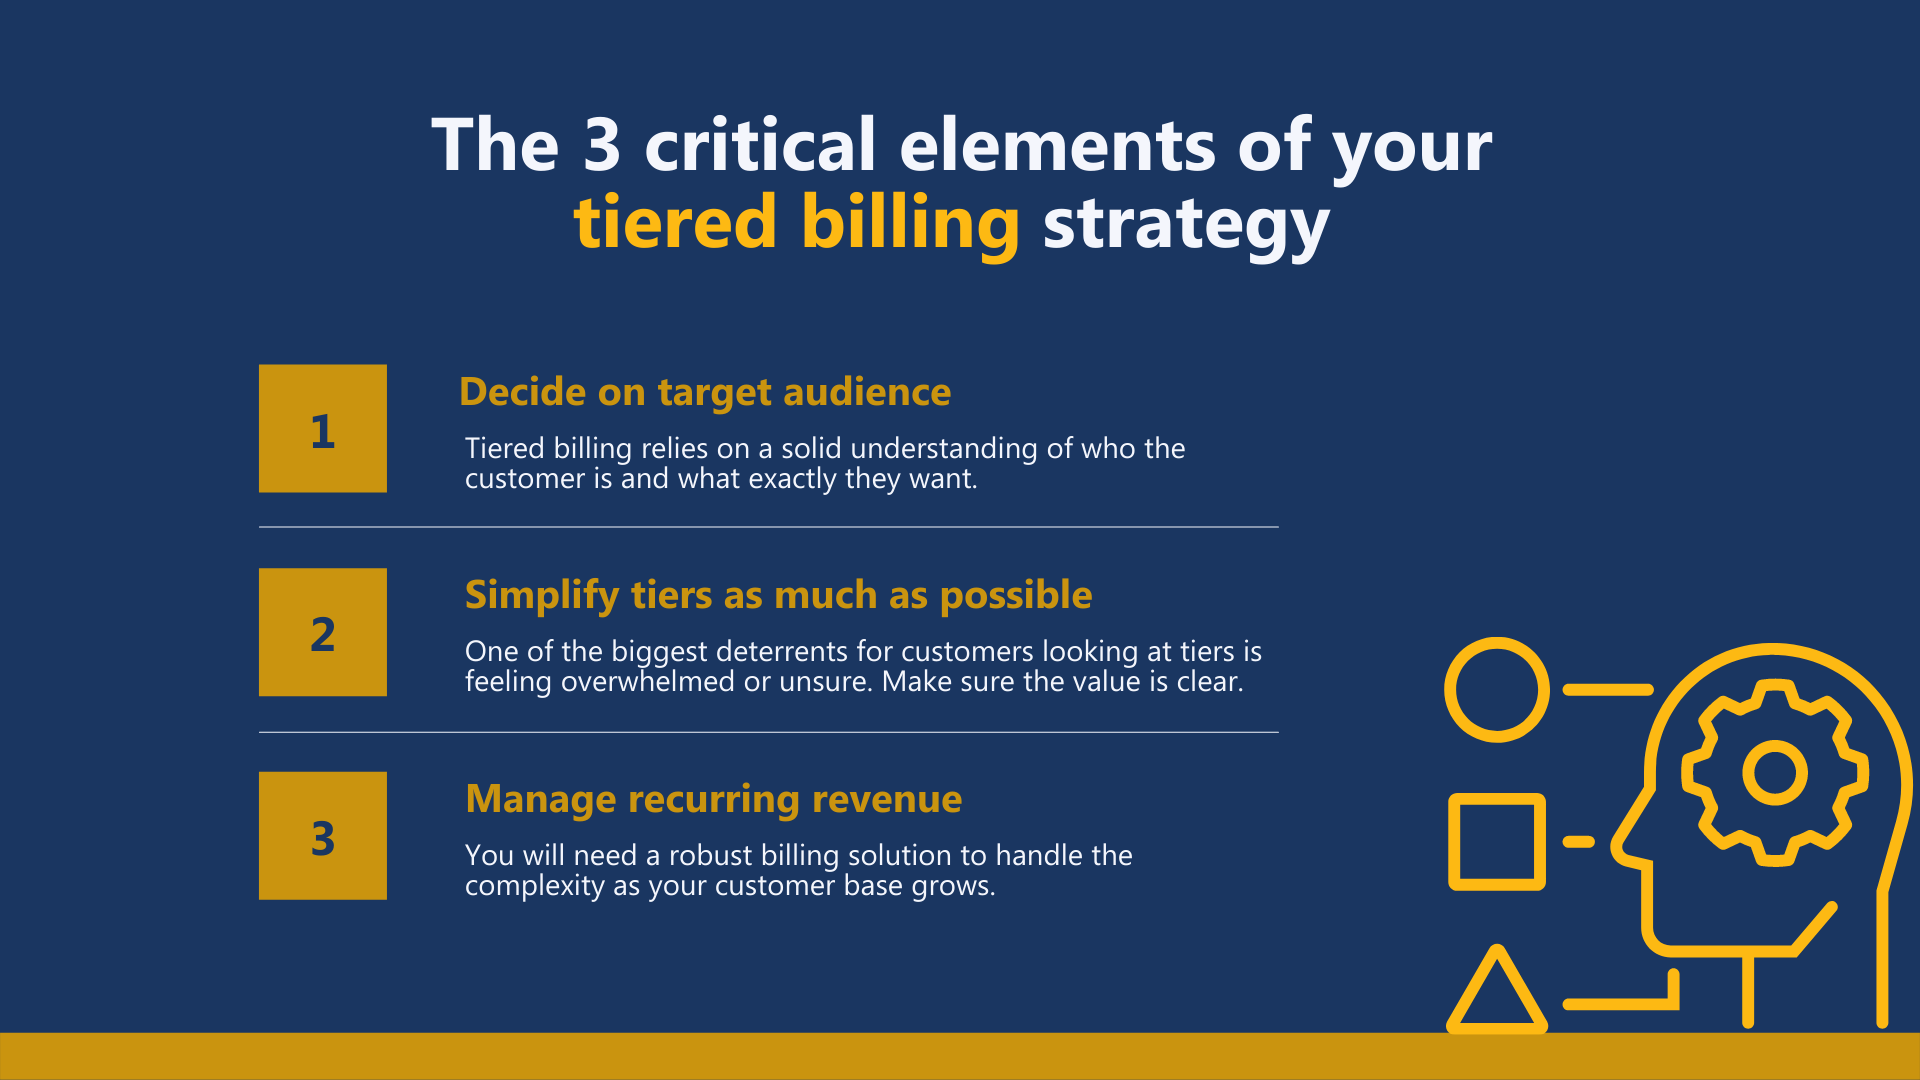 The 3 critical elements of your tiered billing strategy 